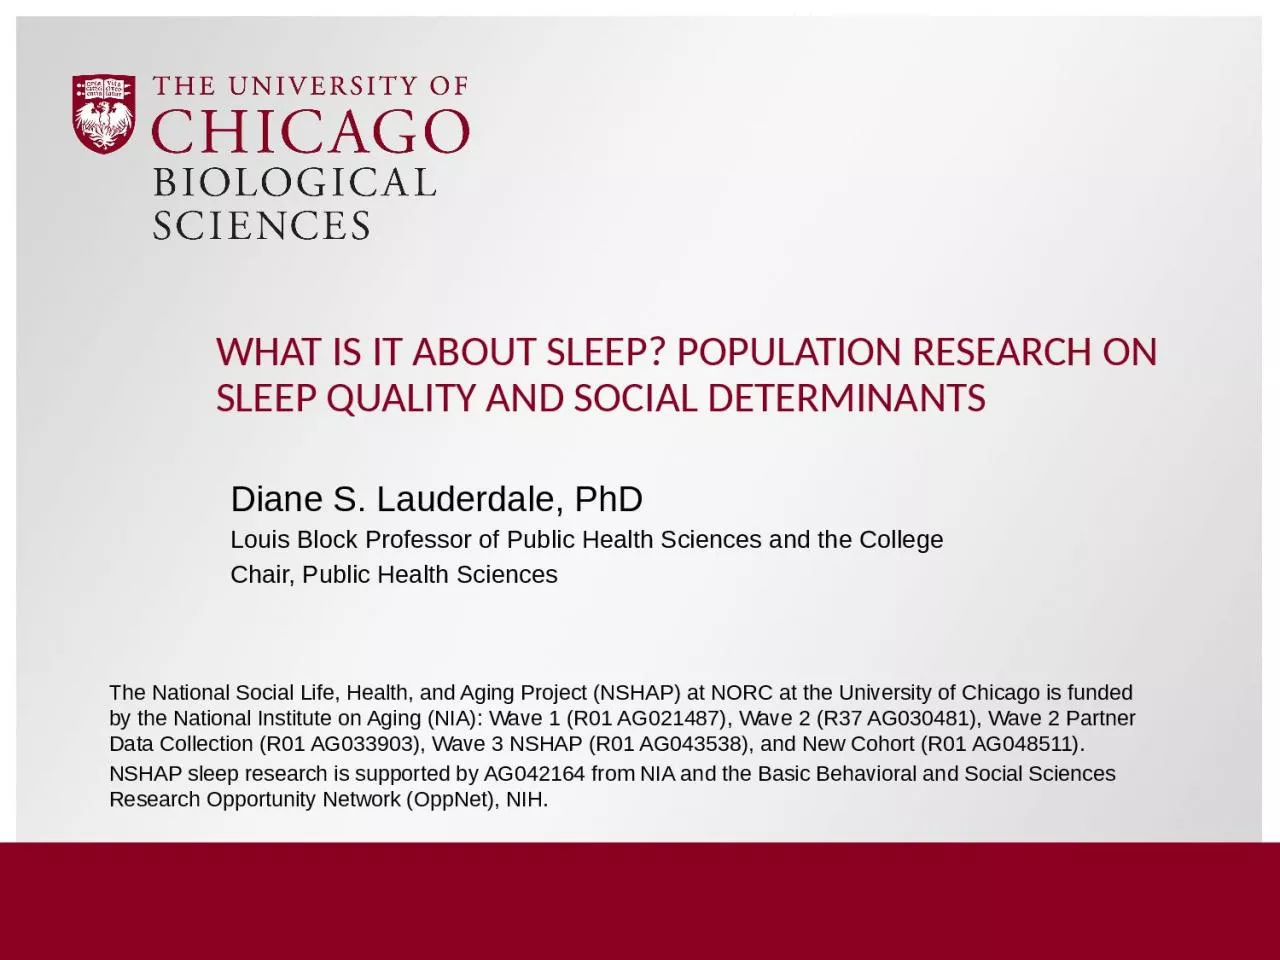 WHAT IS IT ABOUT SLEEP? POPULATION RESEARCH ON SLEEP QUALITY AND SOCIAL DETERMINANTS